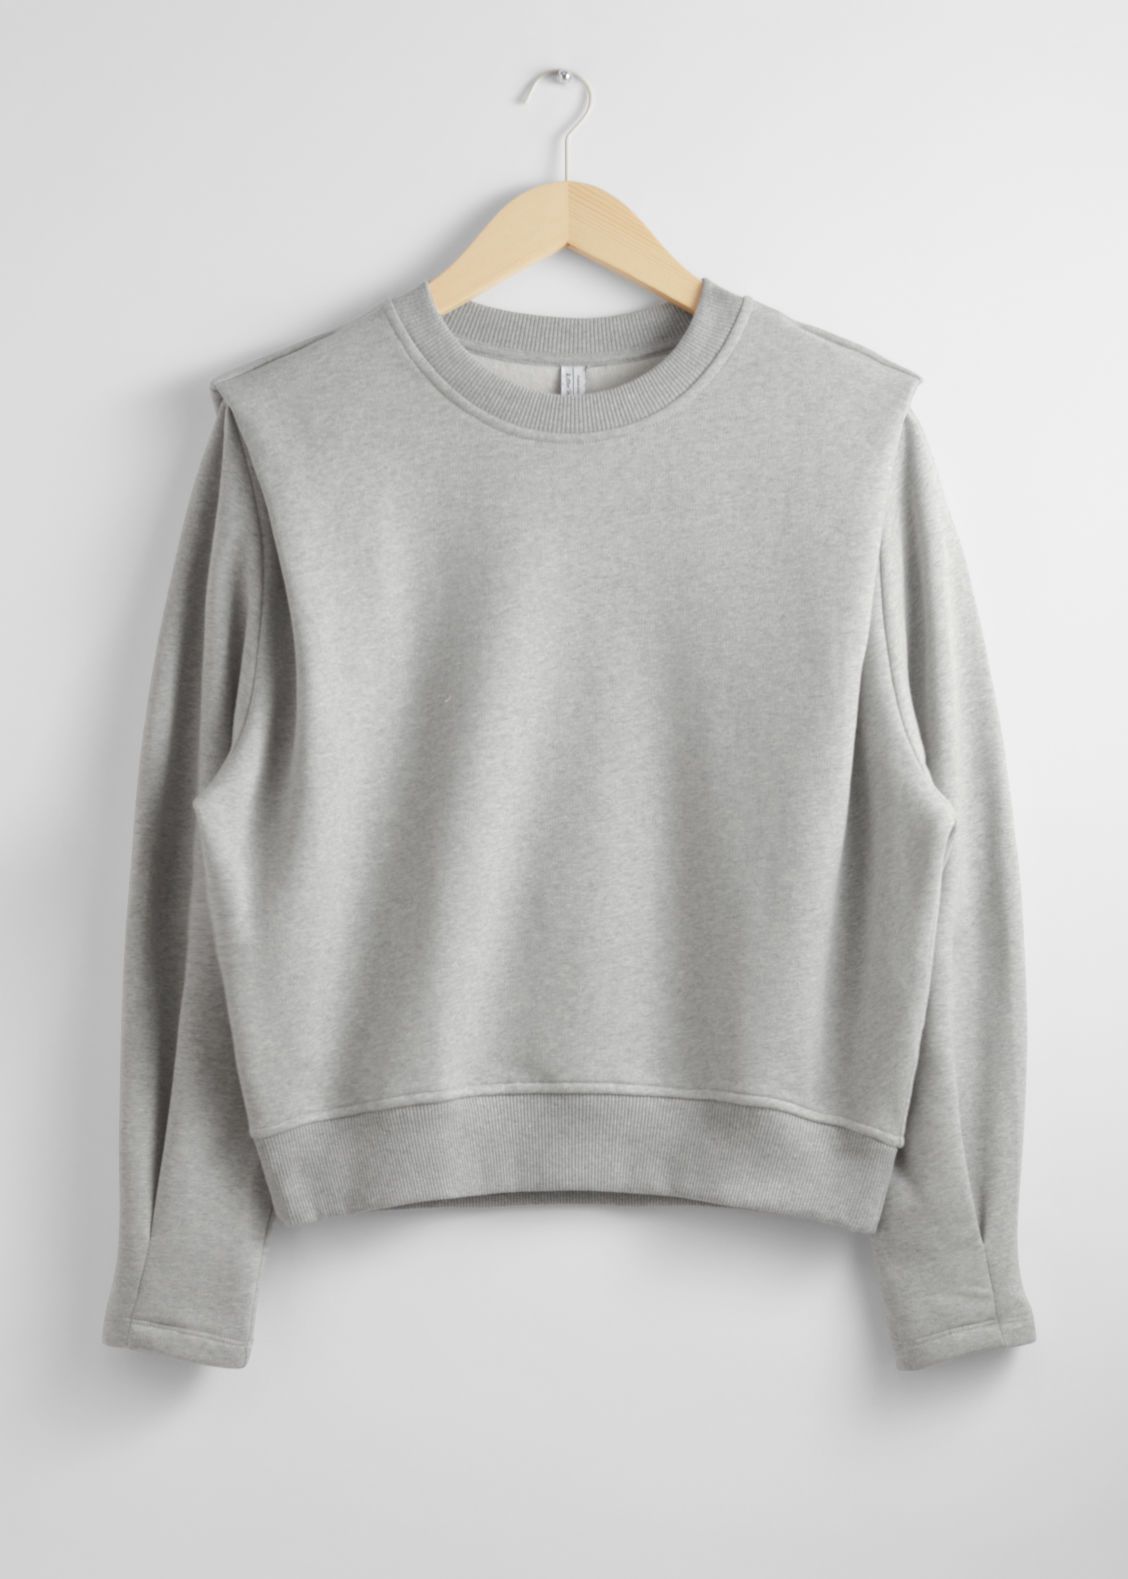 Fitted Pleated-Shoulder Sweatshirt | & Other Stories US